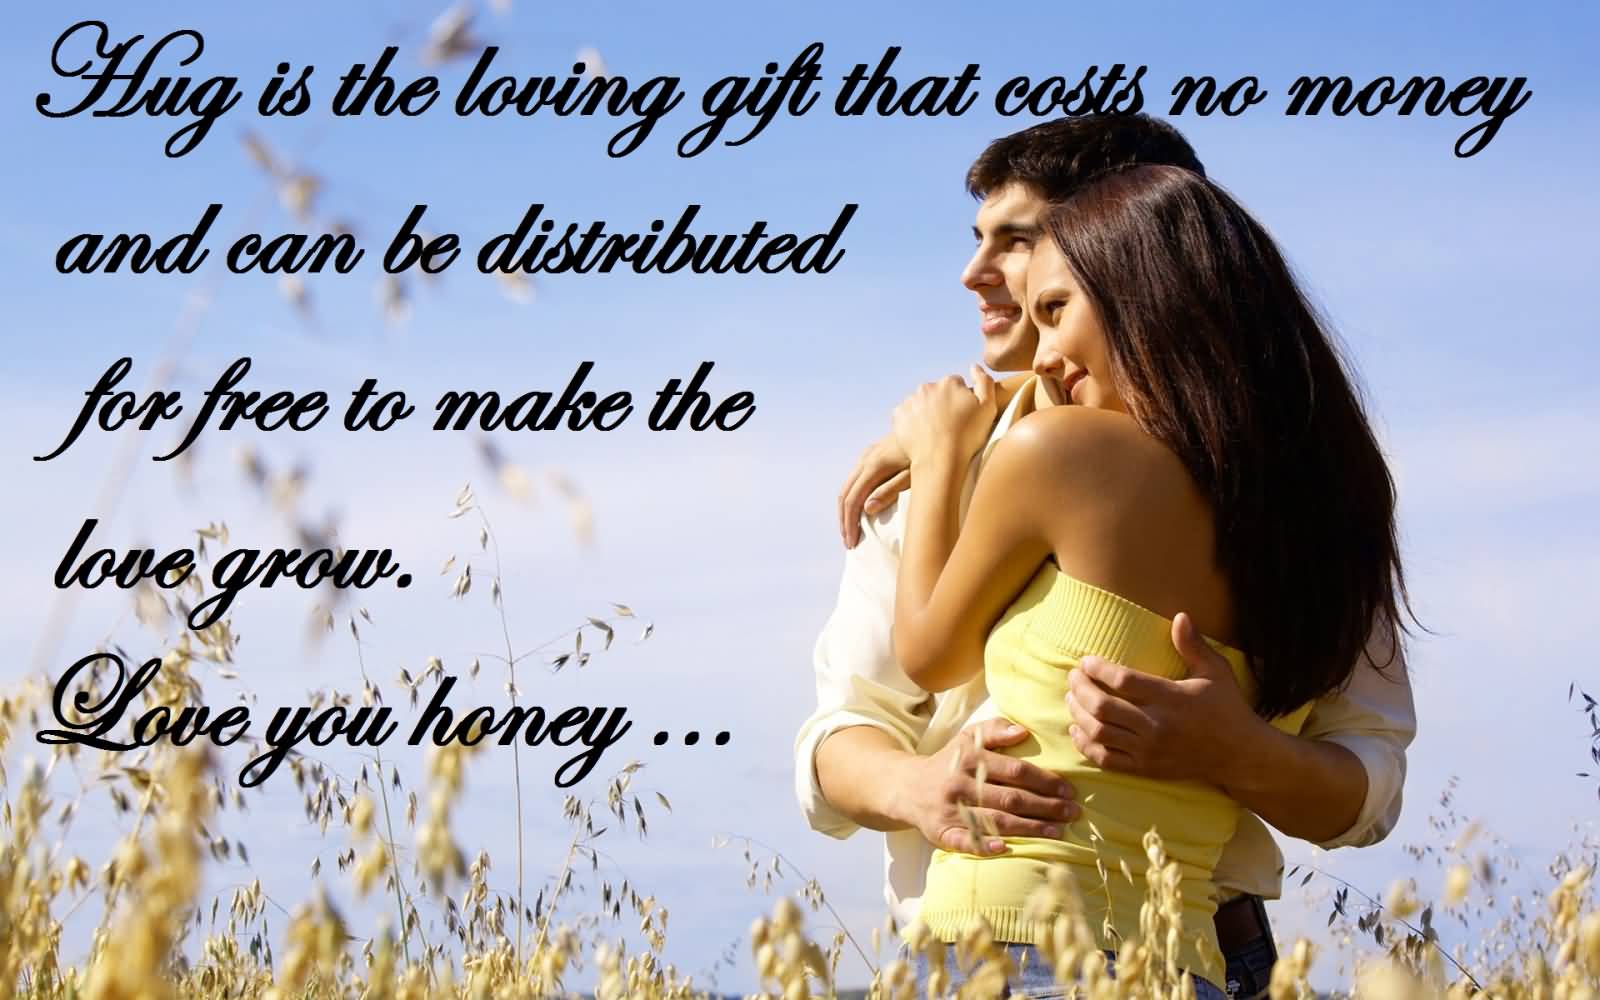 Hug Is The Loving Gift That Costs No Money And Can Be Distributed For Free To Make The Love Grow. Happy Hug Day